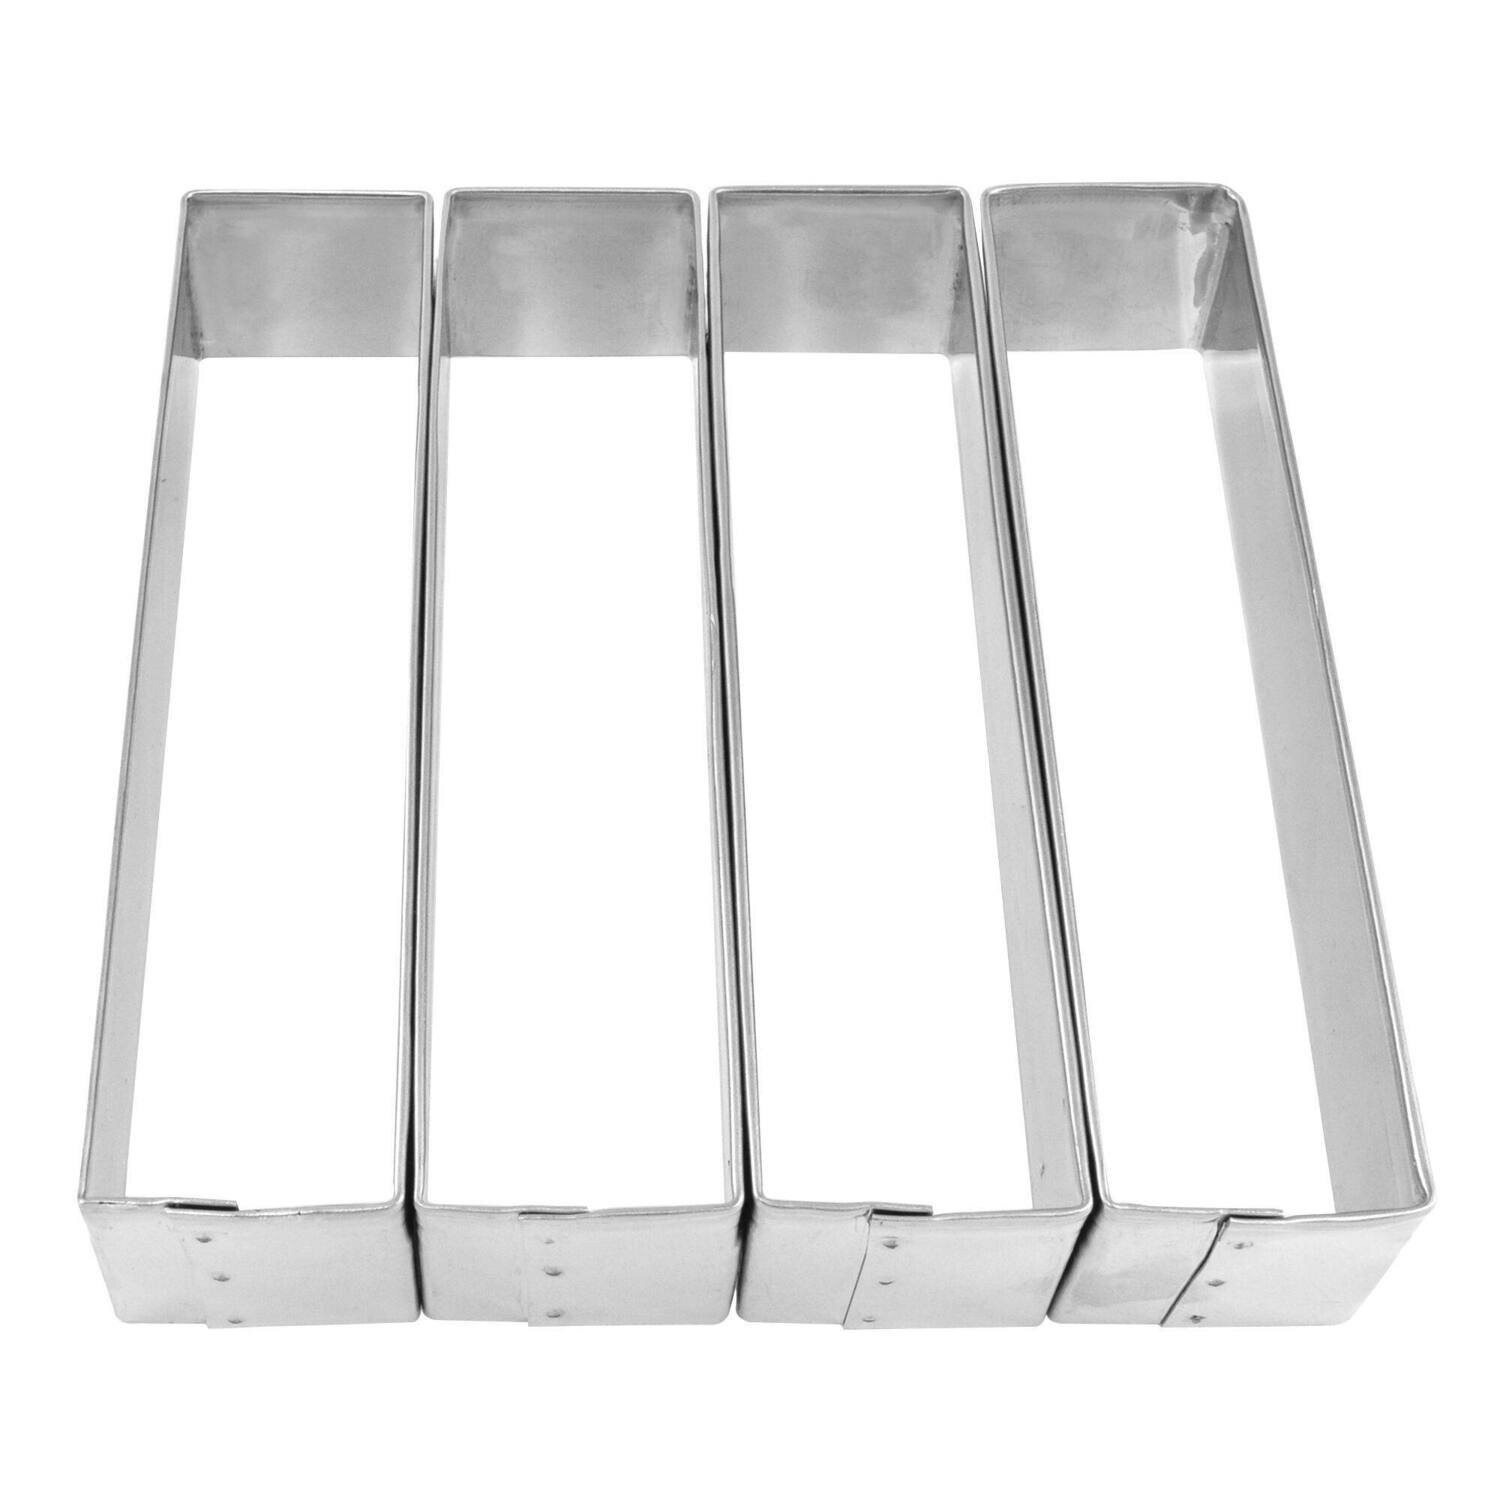 Cookie Stick Cutter 4.5 in 4 Pc Set Stainless Steel 5100